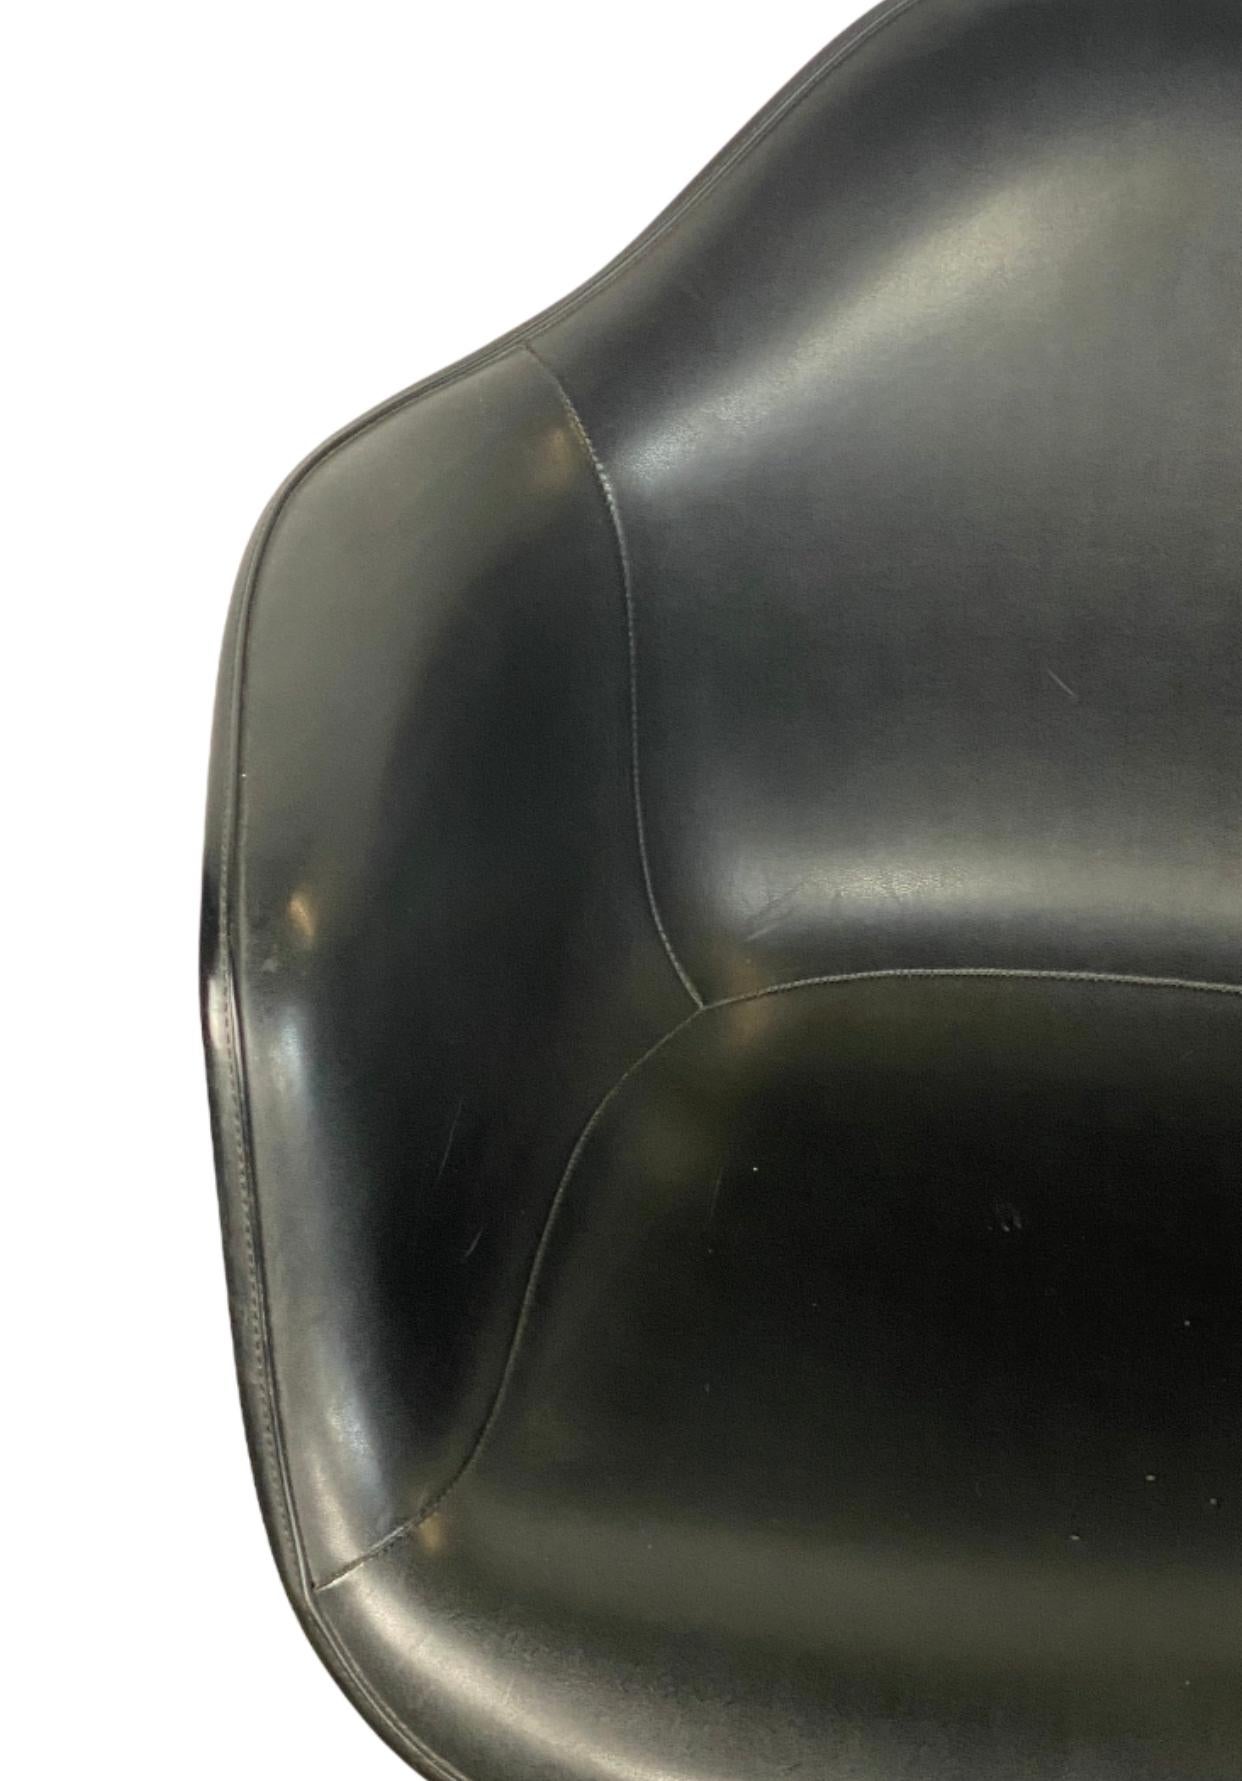 Great example of the Eames classic office chair. Molded fiberglass shell lined with naugahyde for durability and comfort. Conveniently rolls, swivels, on cast aluminum base. Height easily adjusted by turning chair up or down. Signed and guaranteed